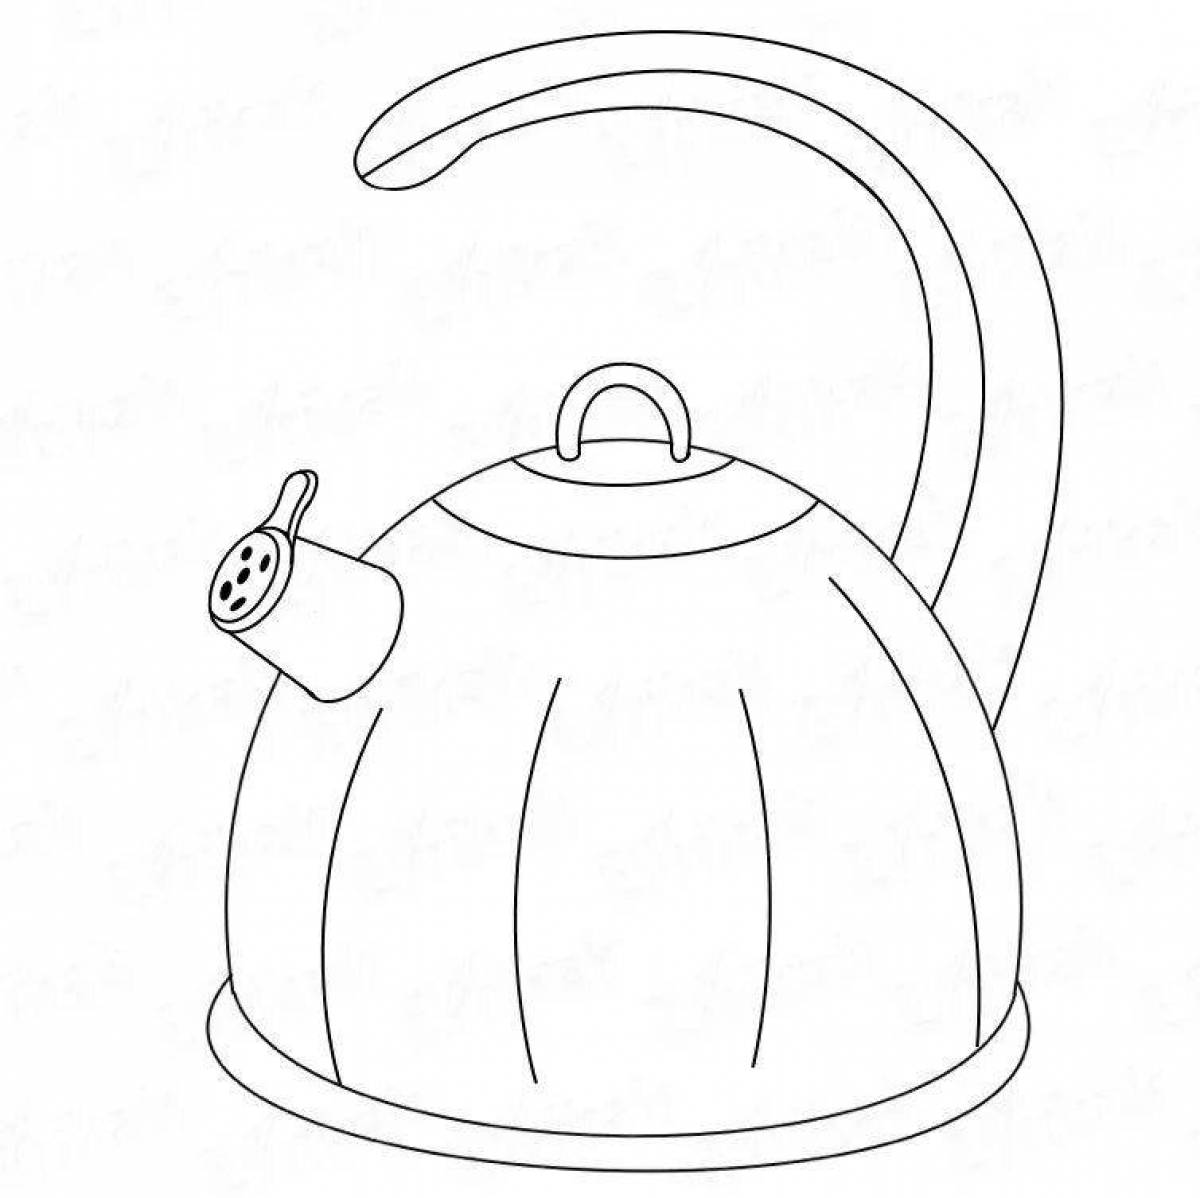 Fairytale coloring of teapot for babies